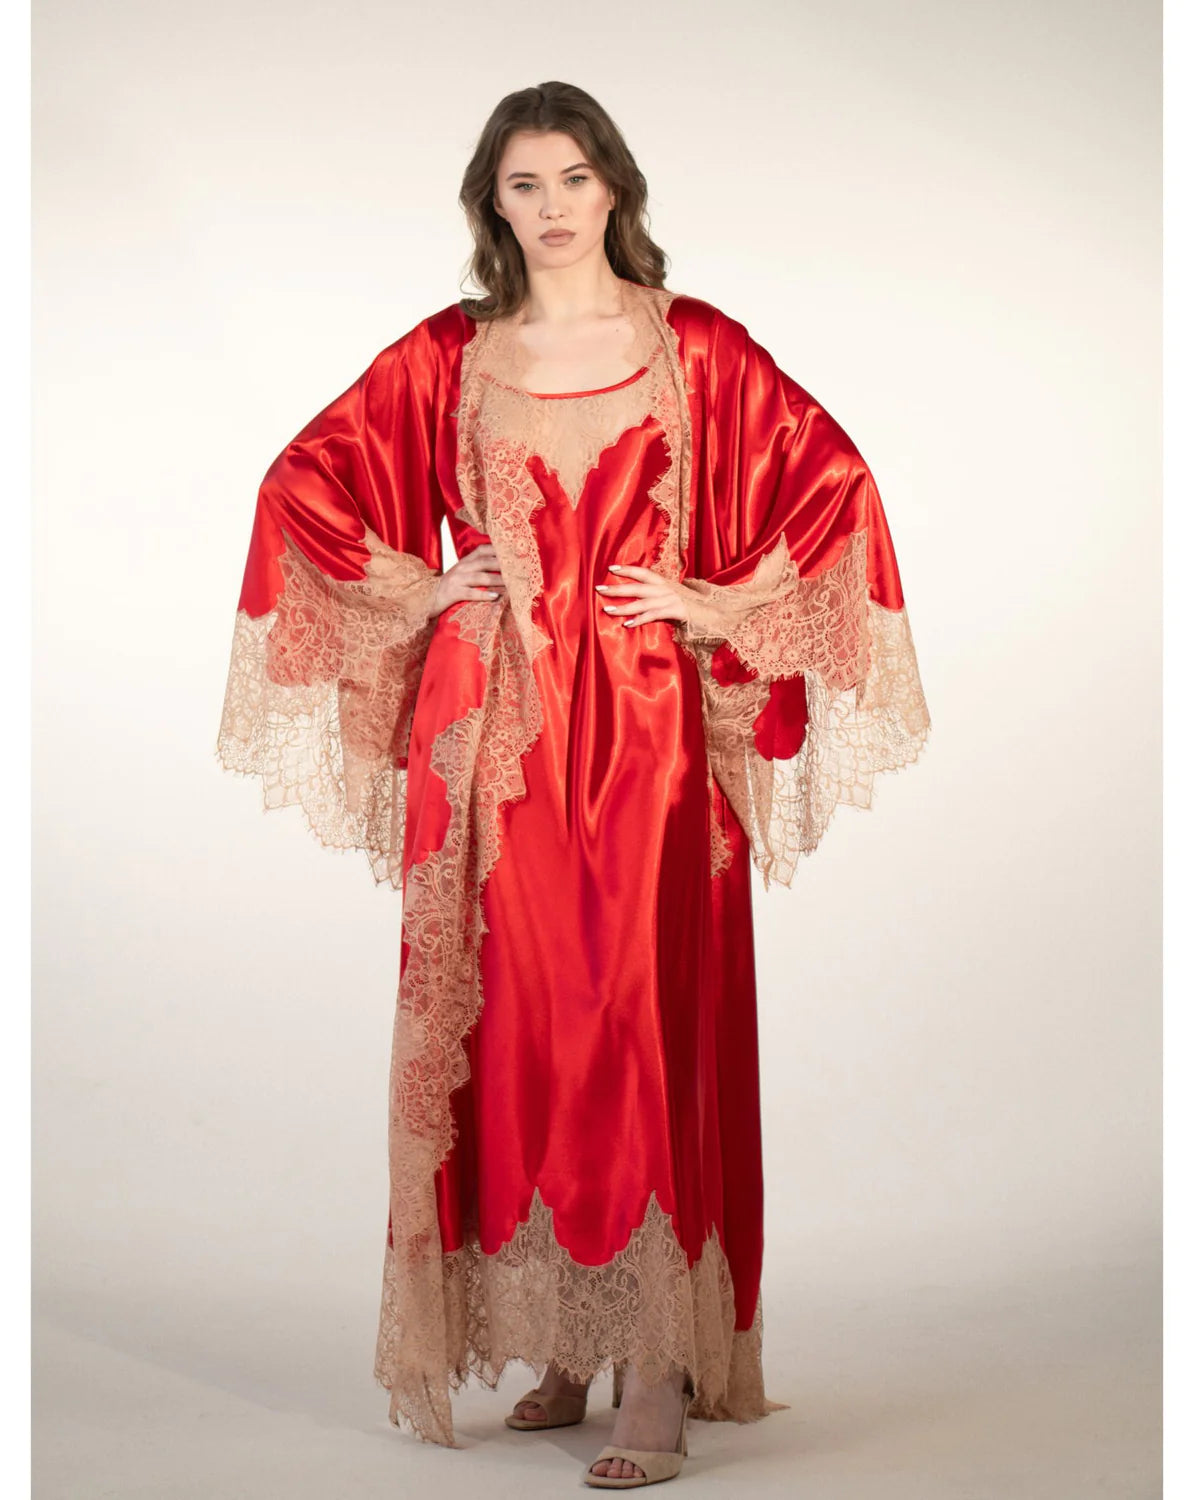 Orient Express Robe and Nightgown Set in Red